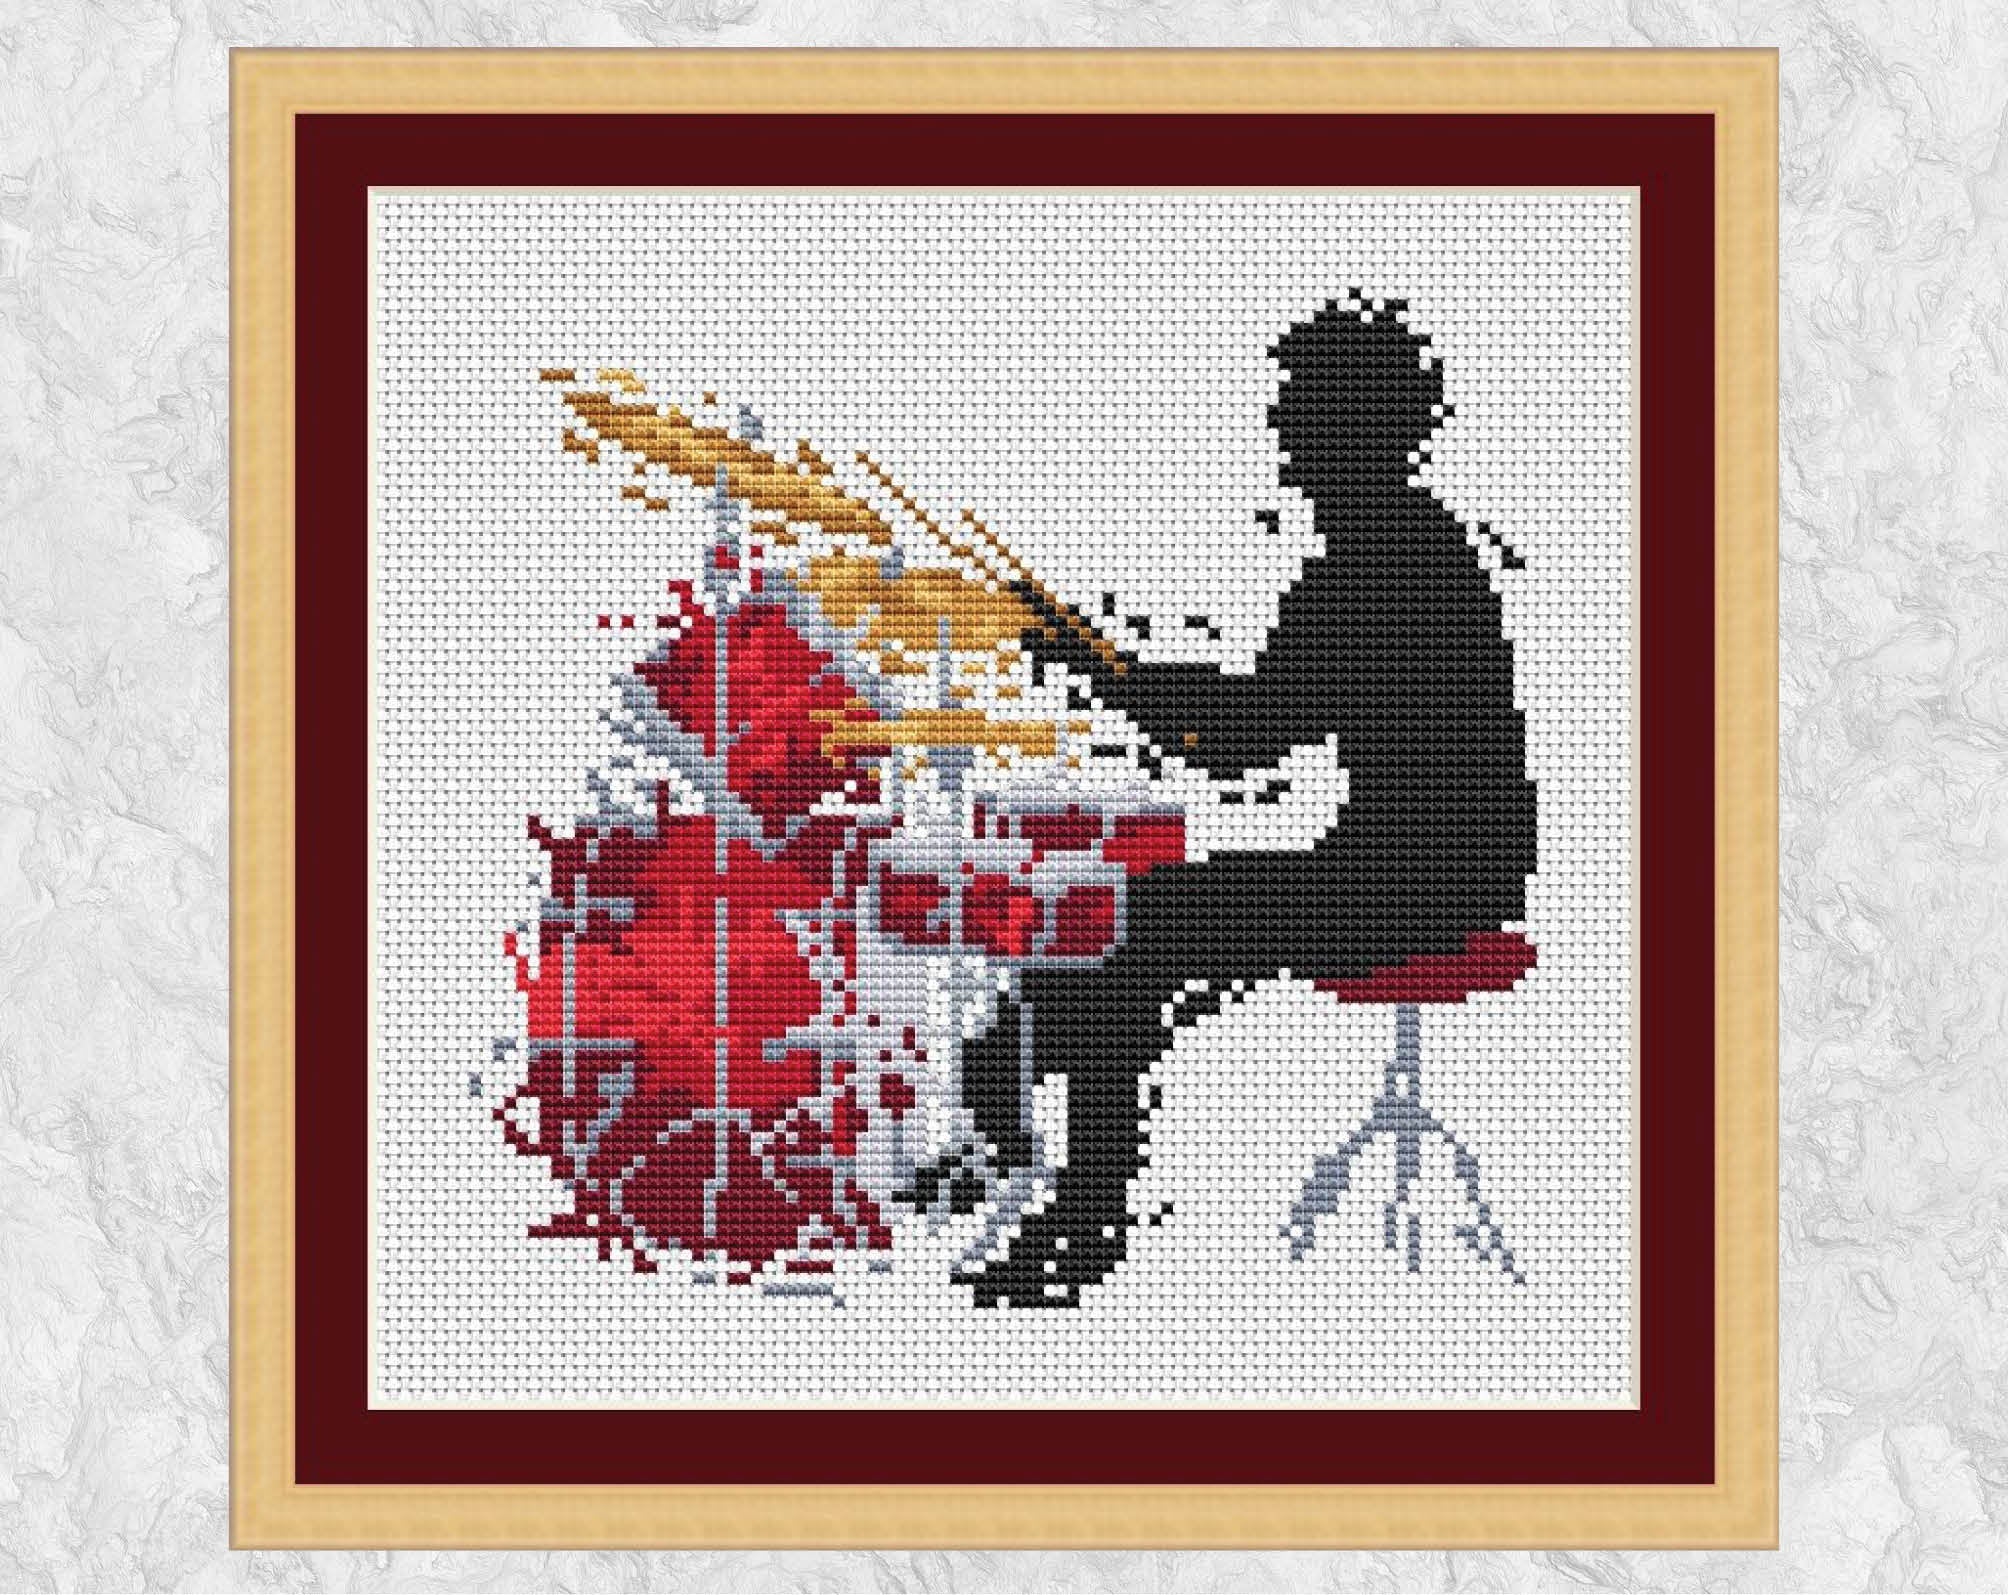 Male drummer music cross stitch pattern - with frame